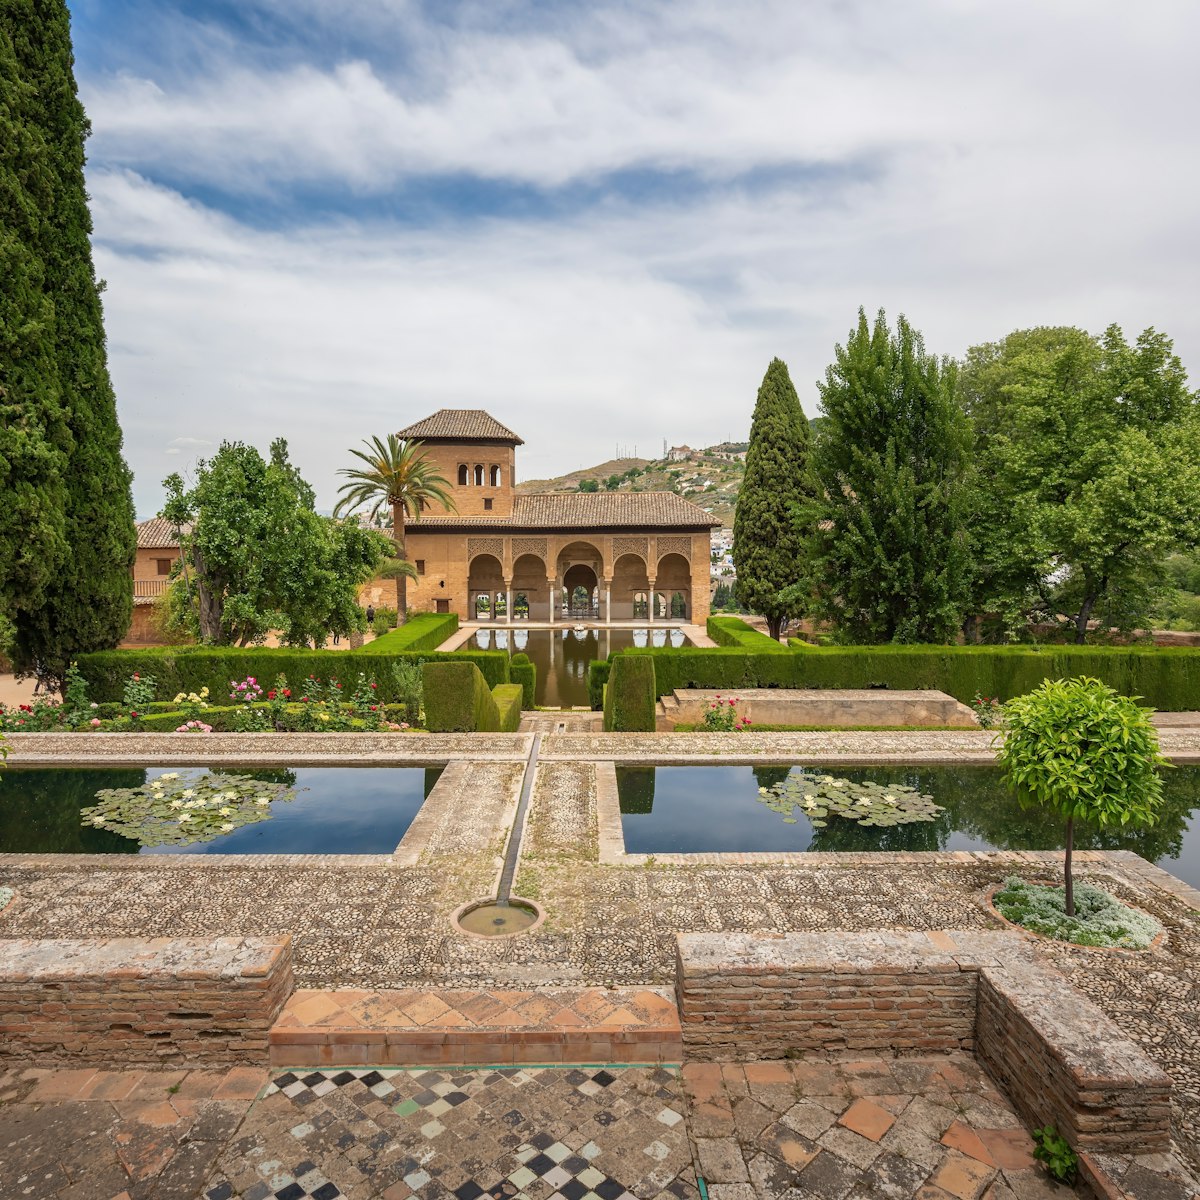 Partal Palace and Gardens at El Partal area of Alhambra, Granada, Andalusia, Spain.